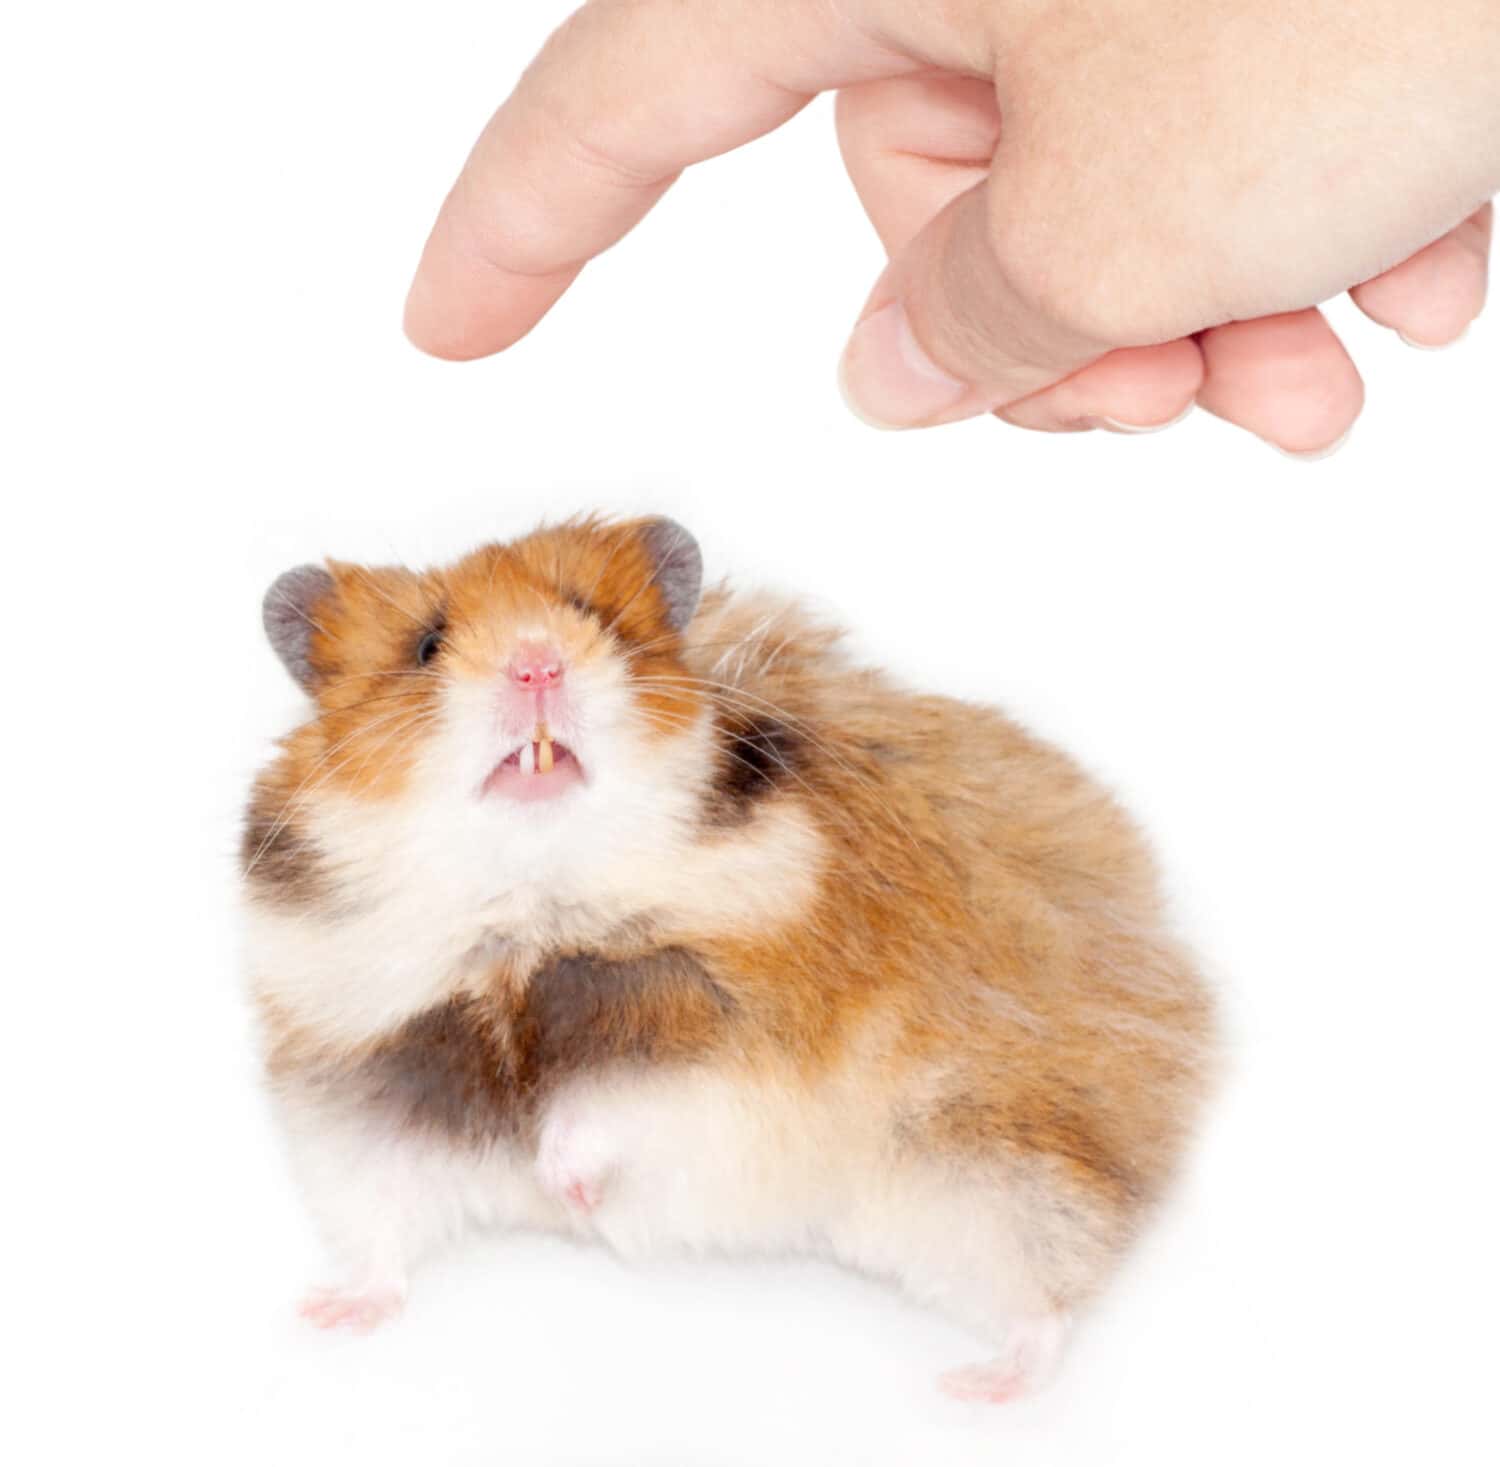 Frightened Syrian hamster wants to bite a man's finger. isolated on white background